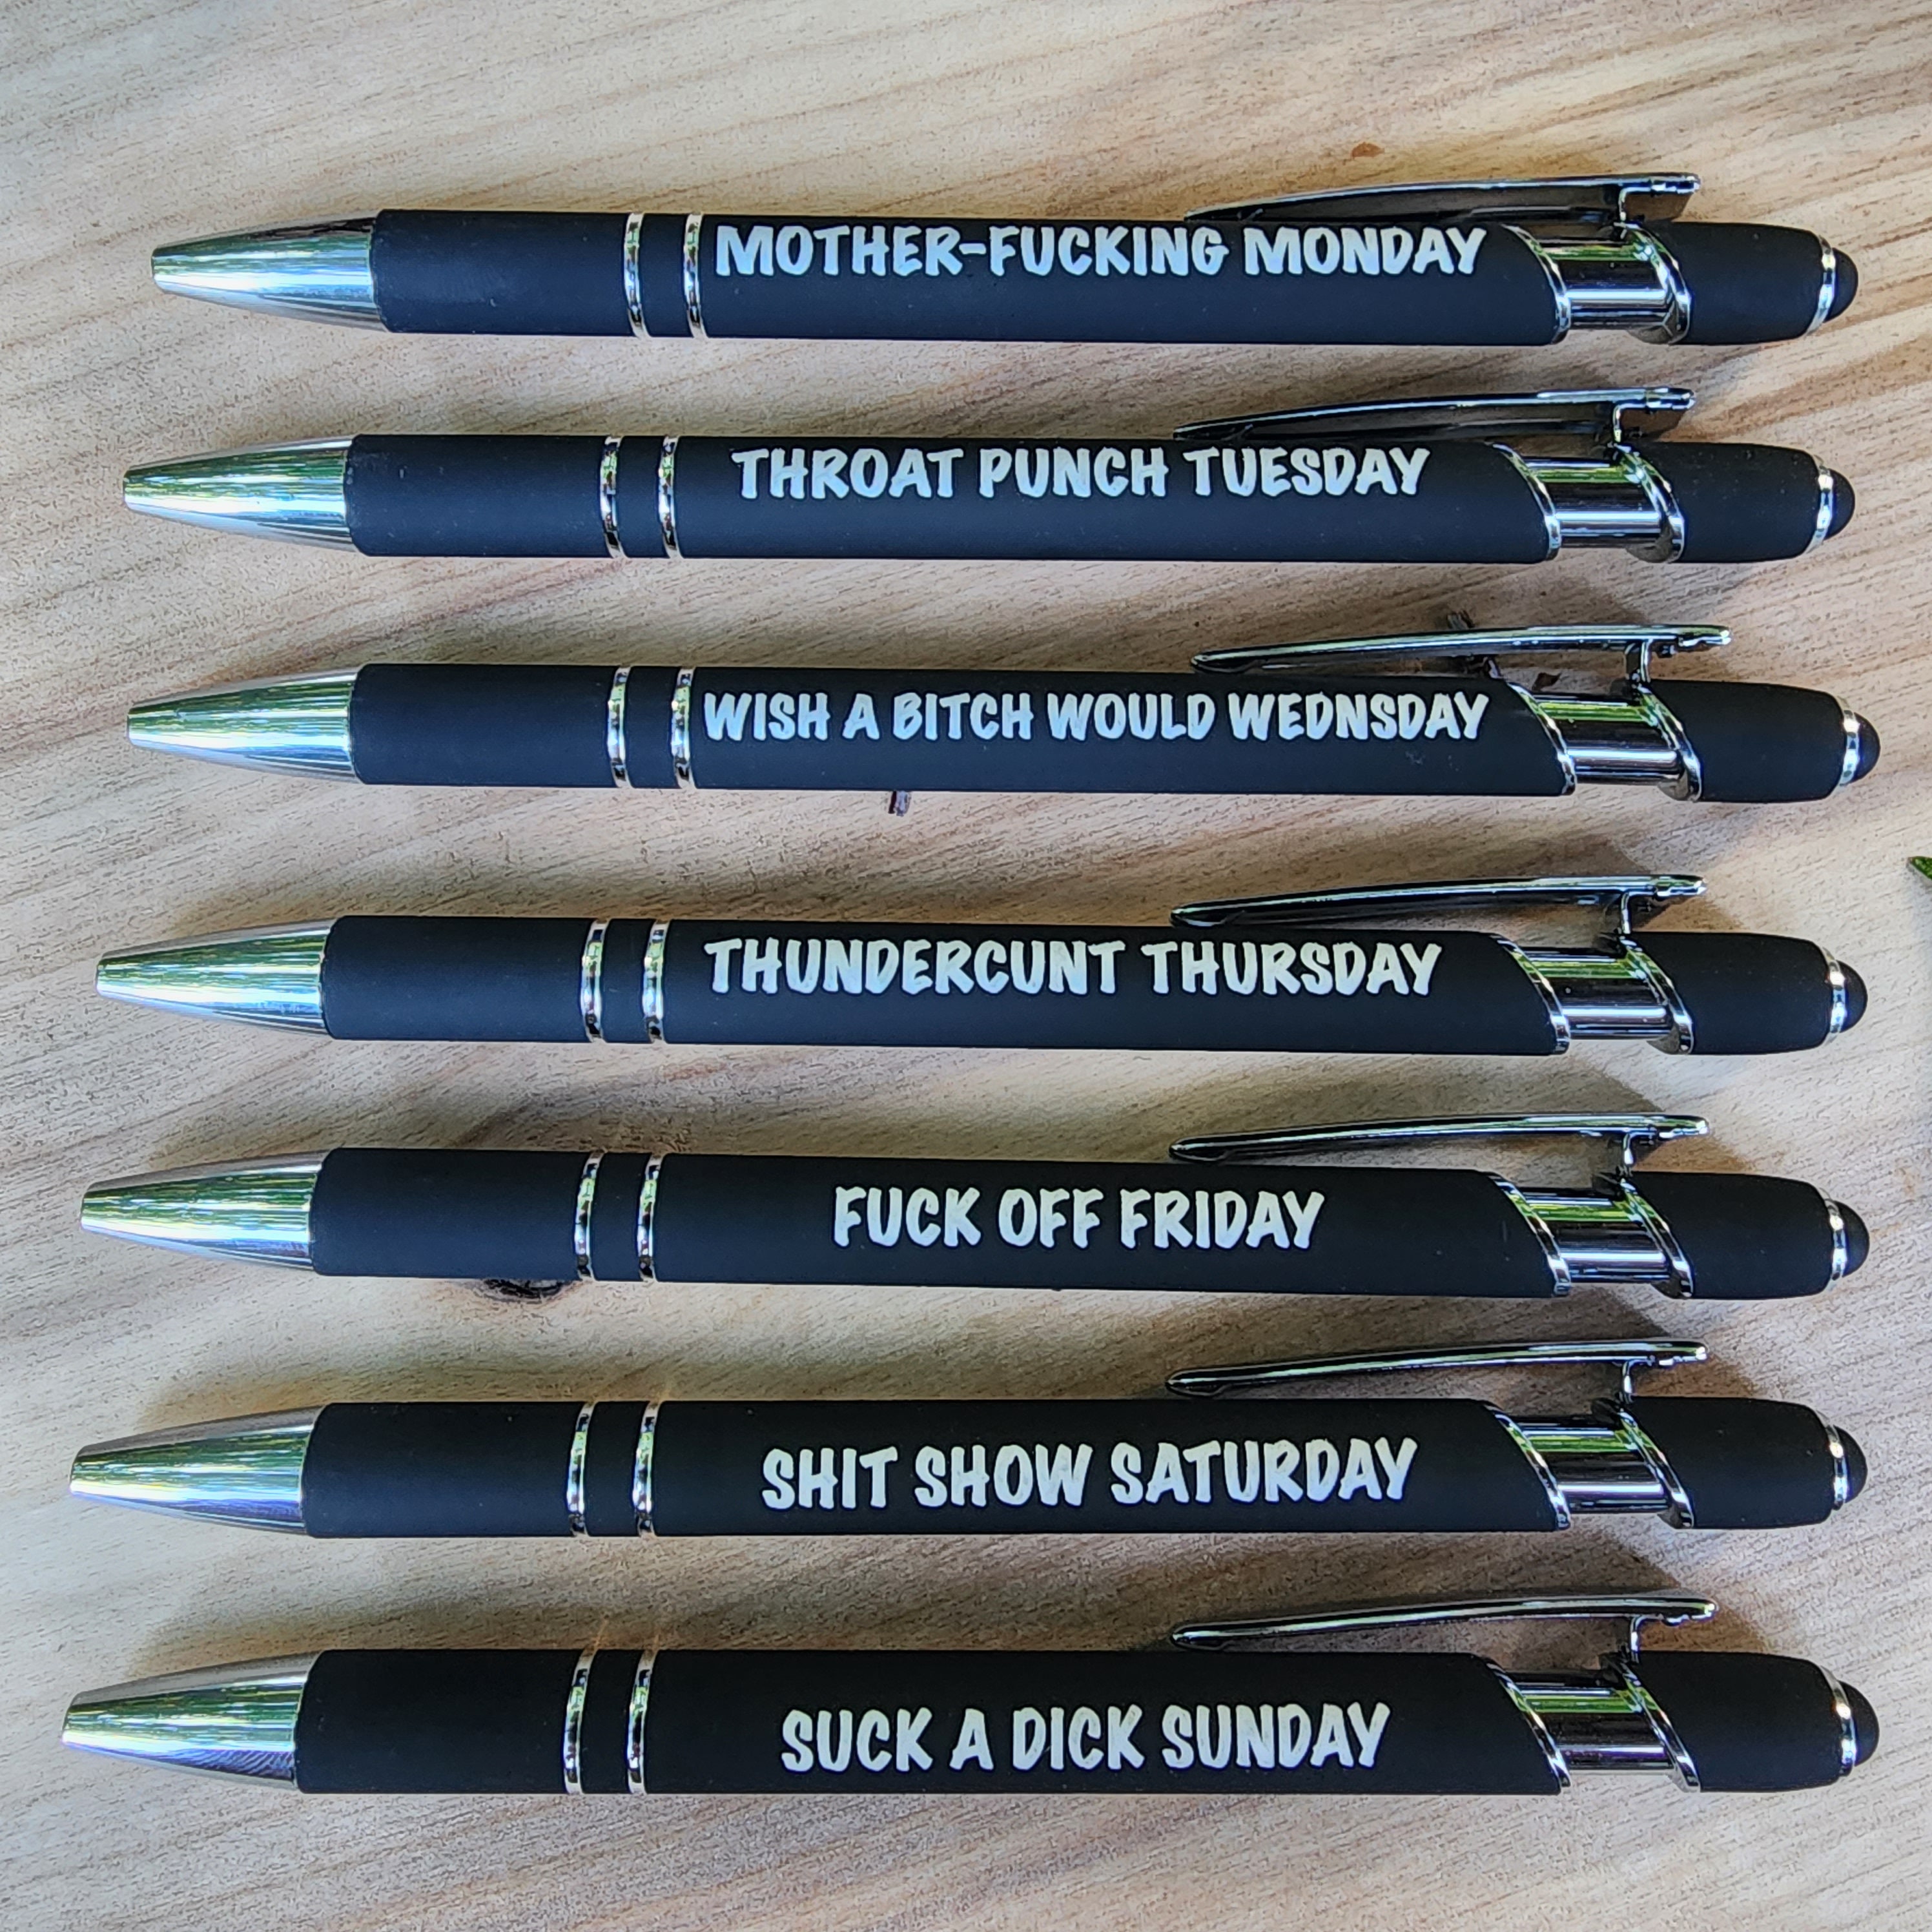  Fresh Outta Fucks Pad and Pen, Fresh Out of Fcks Pen Set,  Black Post It Notes, Snarky Novelty Office Supplies : Office Products